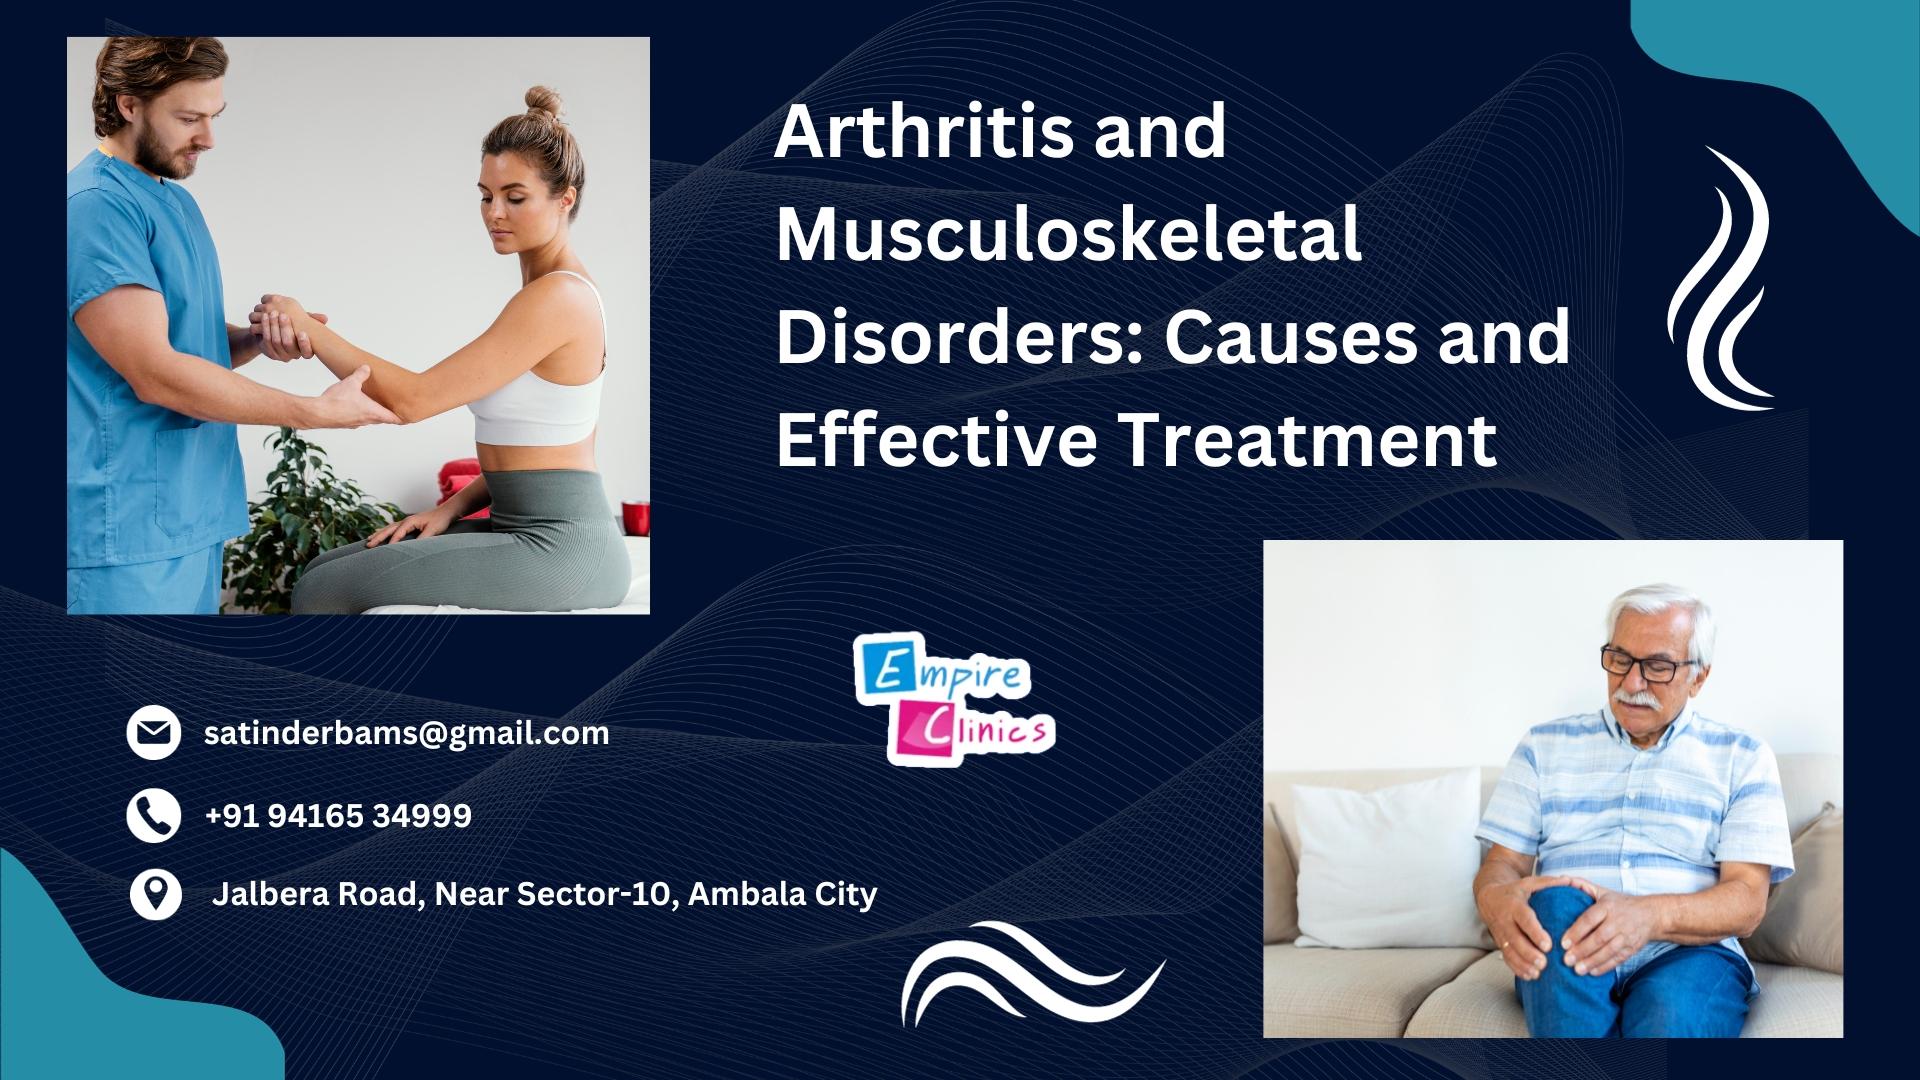 arthritis-and-musculoskeletal-disorders-causes-and-effective-treatment